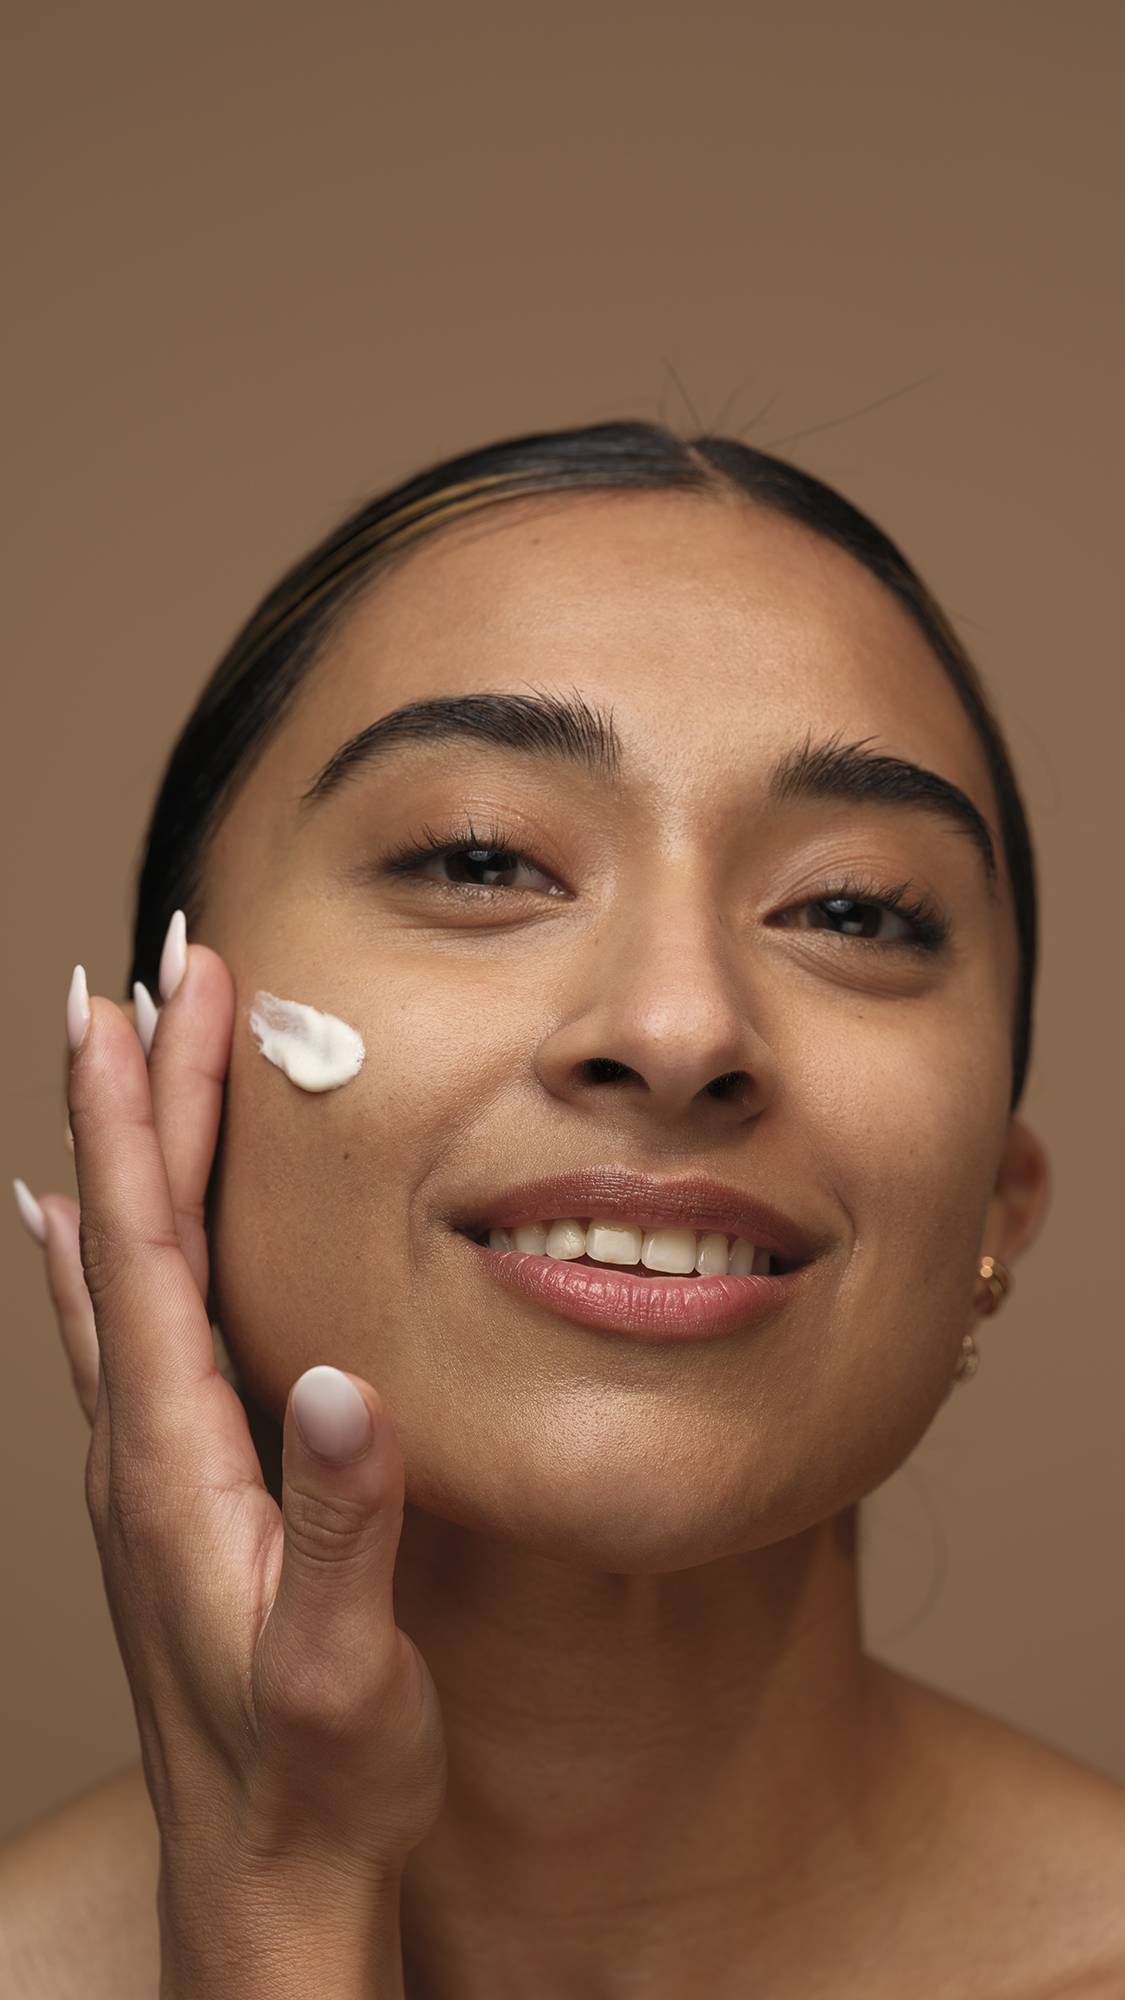 A close-up image of the model's smiling face as they start to apply the Gorgeous self-preserving moisturiser to one cheek. They are on a warm, earthy-brown background. 